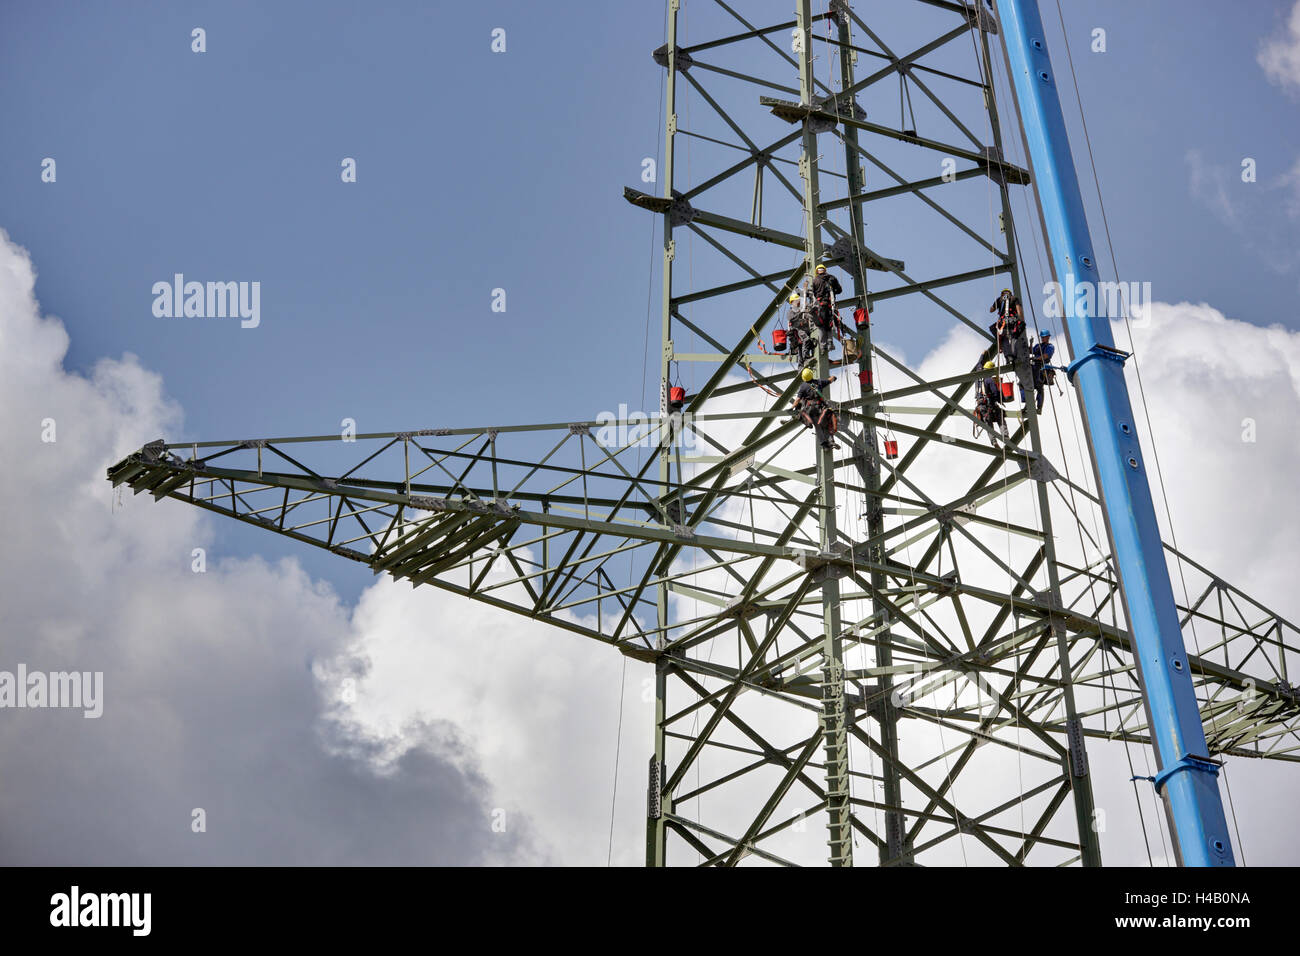 Men working in high-voltage power pylon, Thuringian Forest Stock Photo